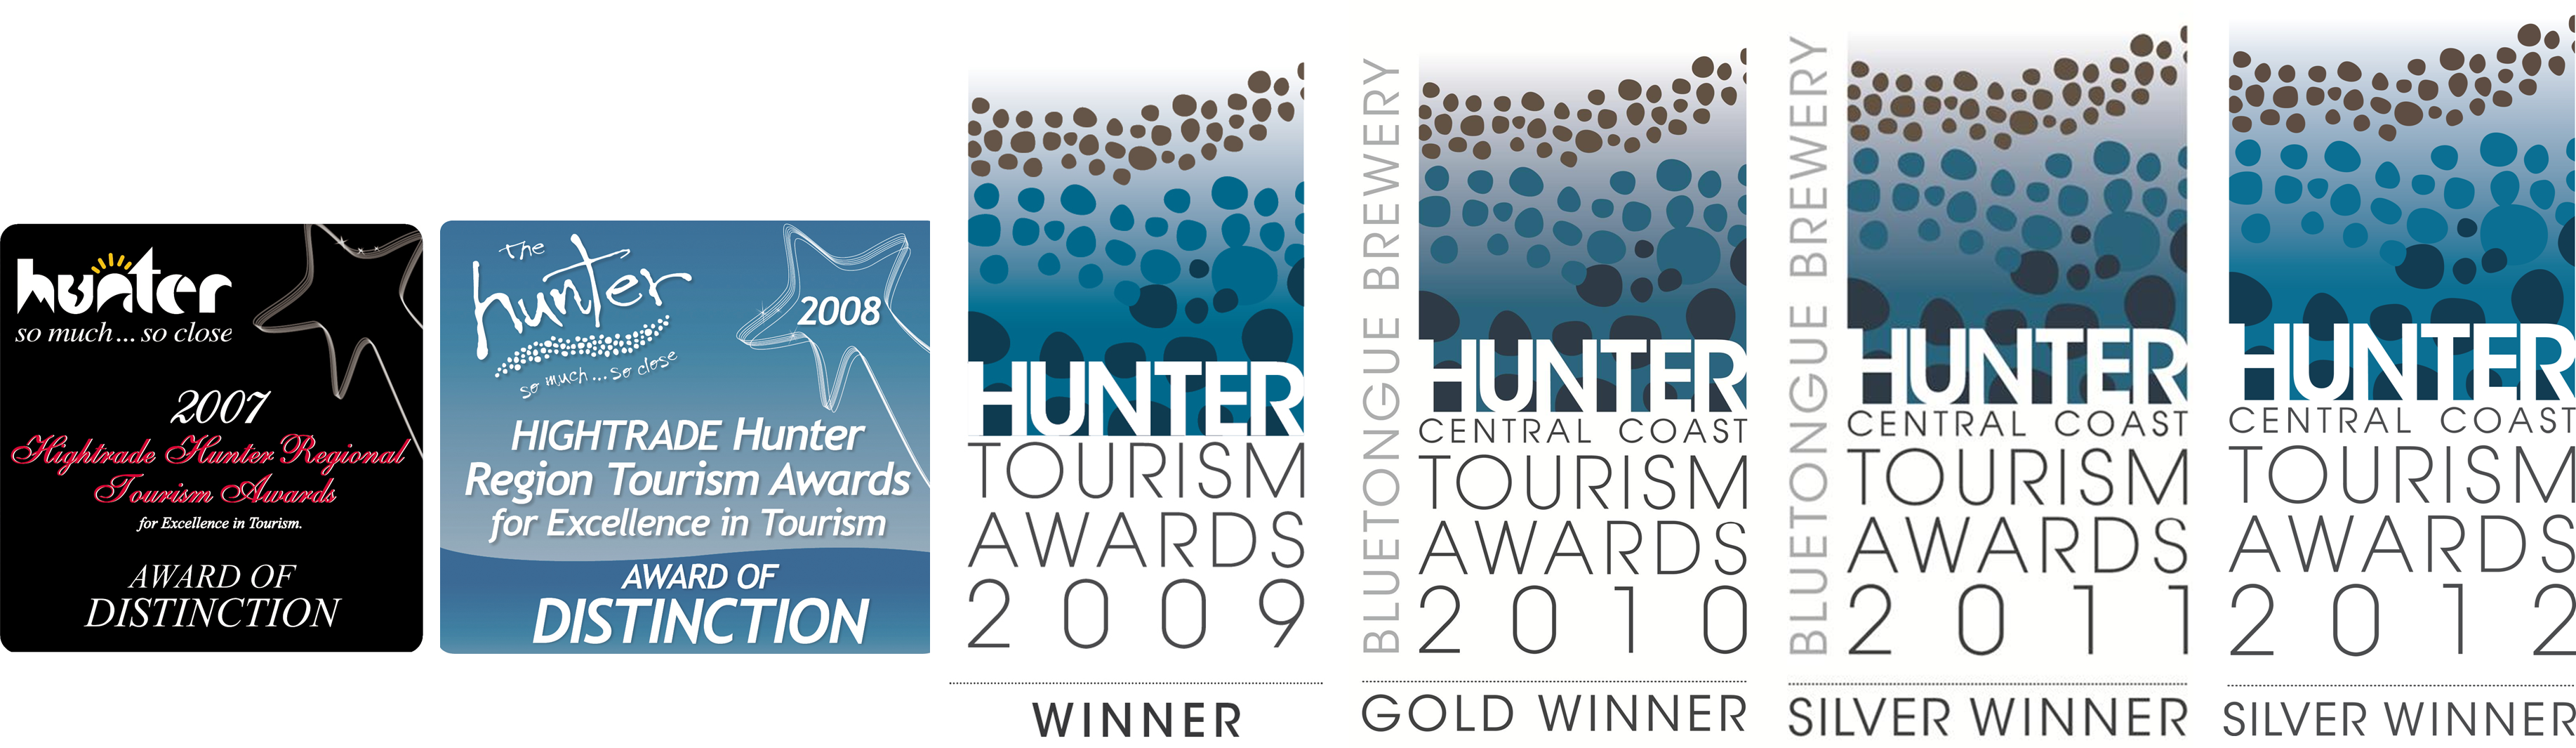 Hunter Accommodation - Best Deluxe Accommodation 2007 to 2012 Awards